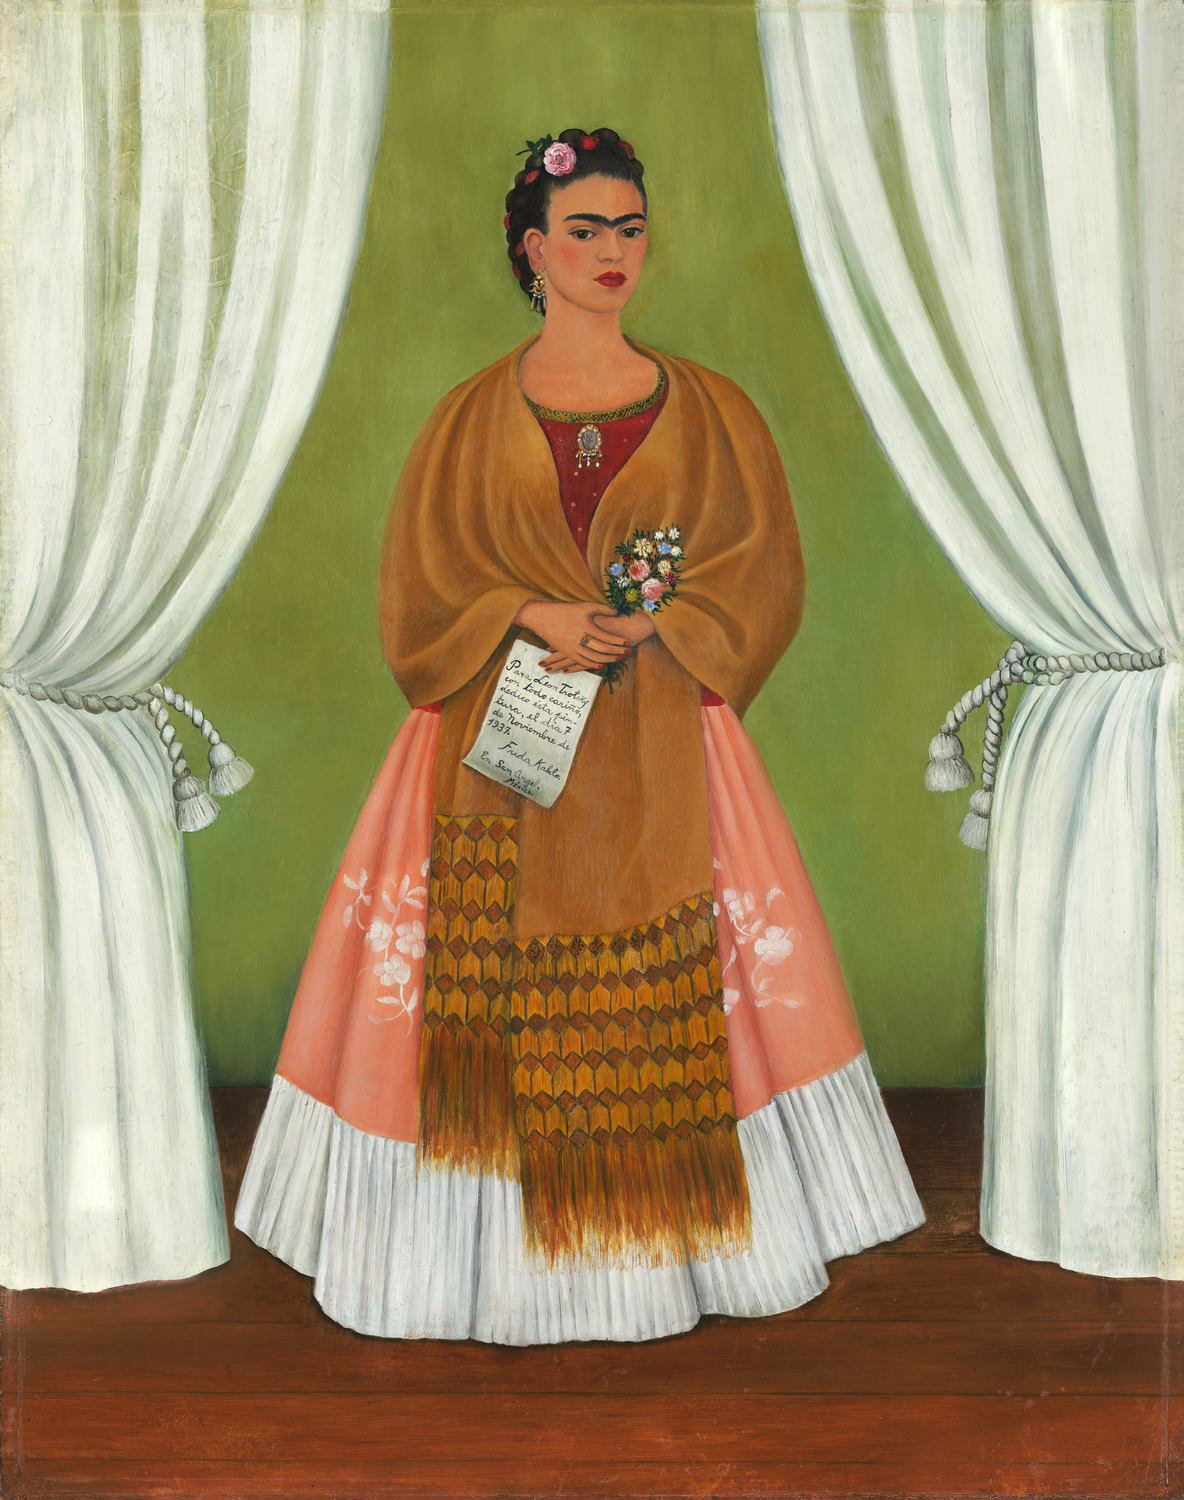 Frida Kahlo, Self-Portrait Dedicated to Leon Trotsky, 1937; Oil on Masonite, 30 x 24 in.; National Museum of Women in the Arts, Gift of the Honorable Clare Boothe Luce; © Banco de México Diego Rivera Frida Kahlo Museums Trust, Mexico, D.F./Artists Rights Society (ARS), New York; Image by GoogleFor Press ONLY